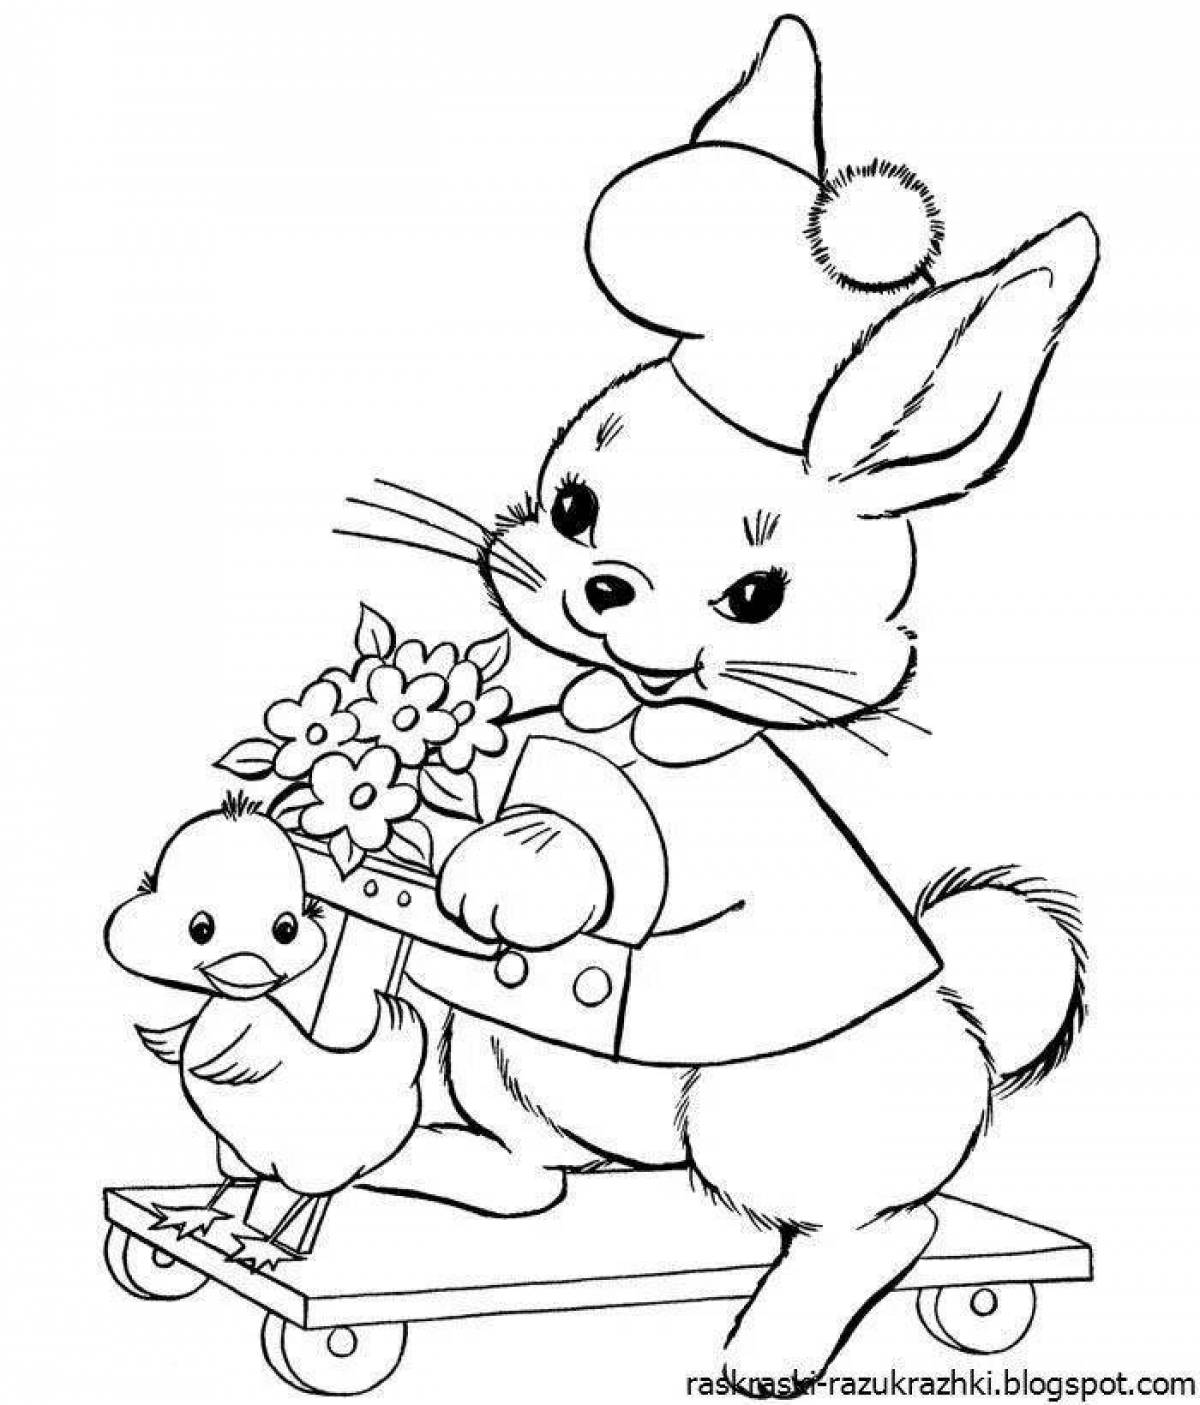 Coloring live cat and hare